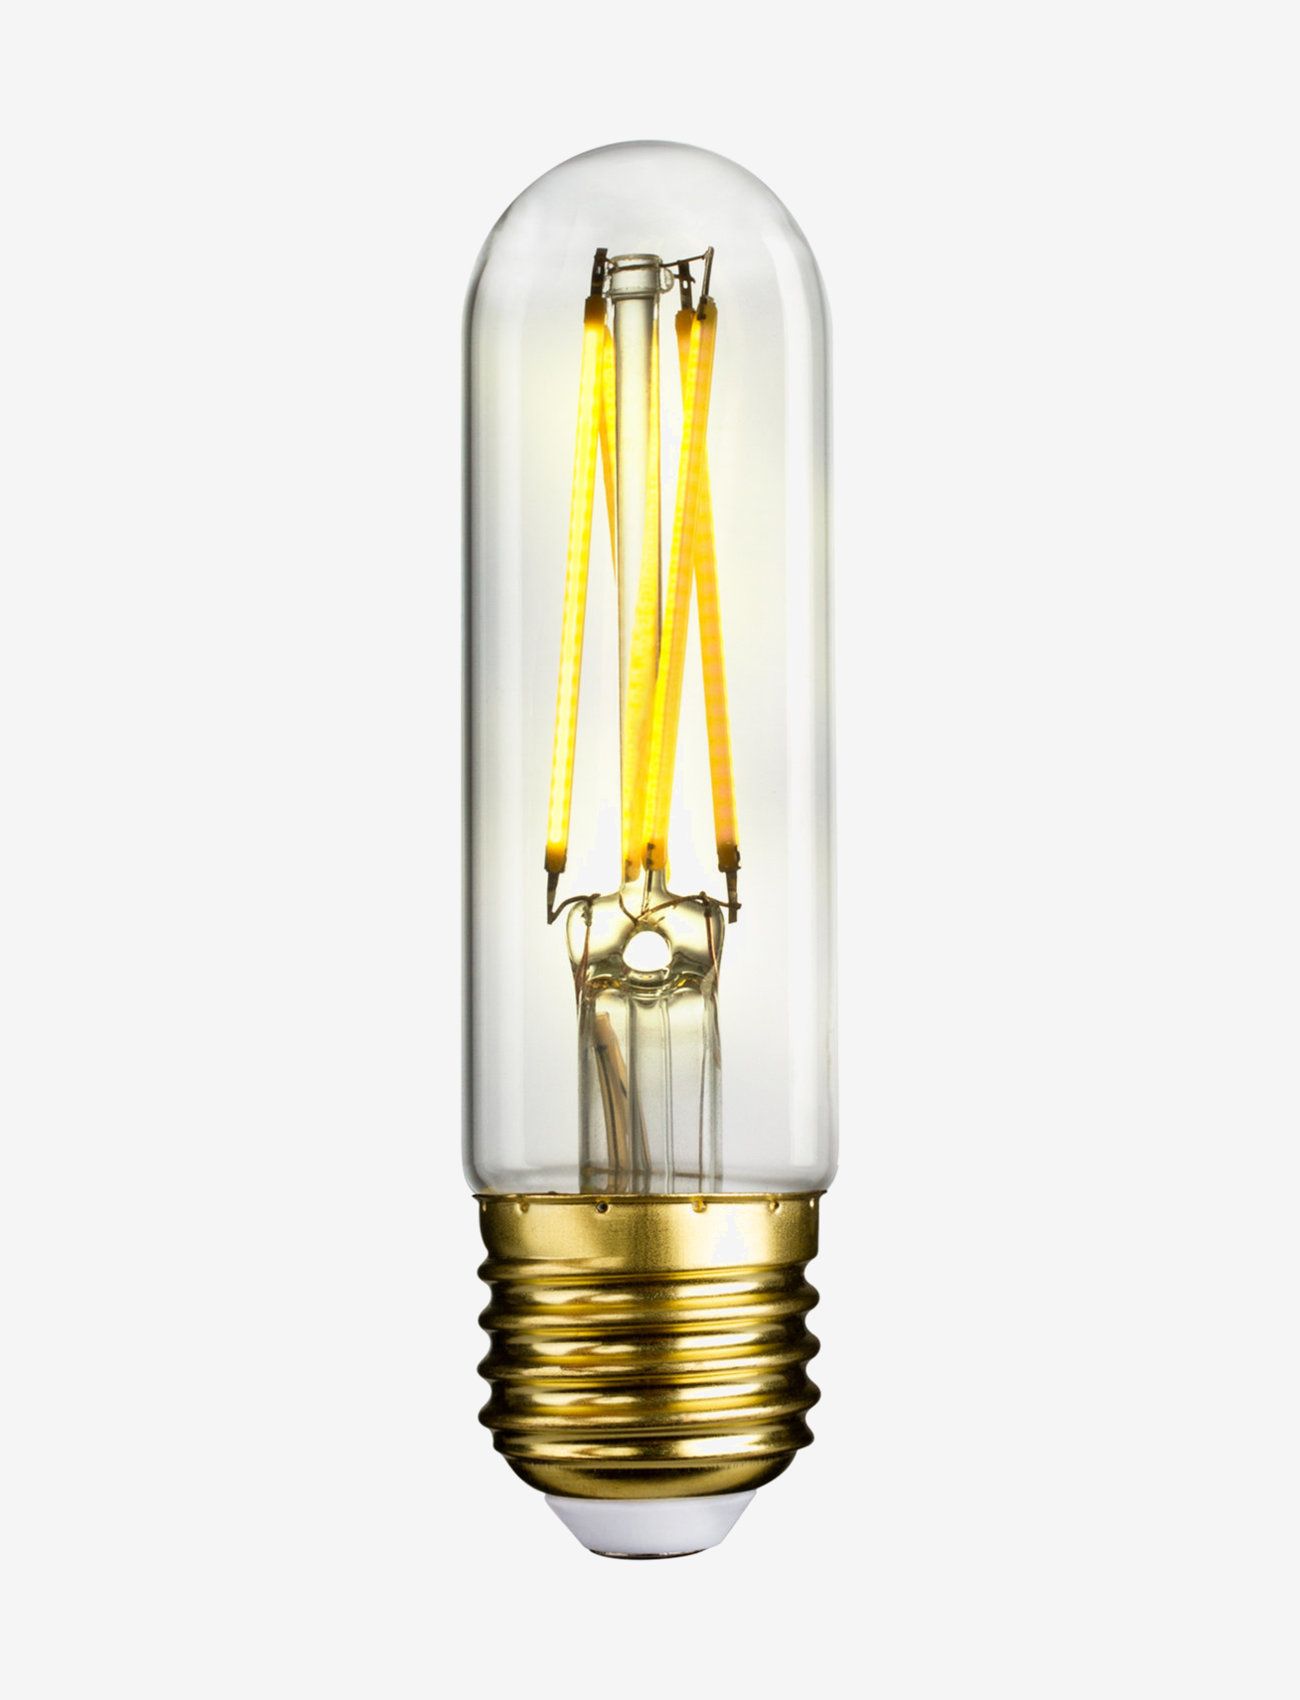 e3light - e3 LED Proxima E14 927 900lm Clear Dimmable - die niedrigsten preise - clear - 0